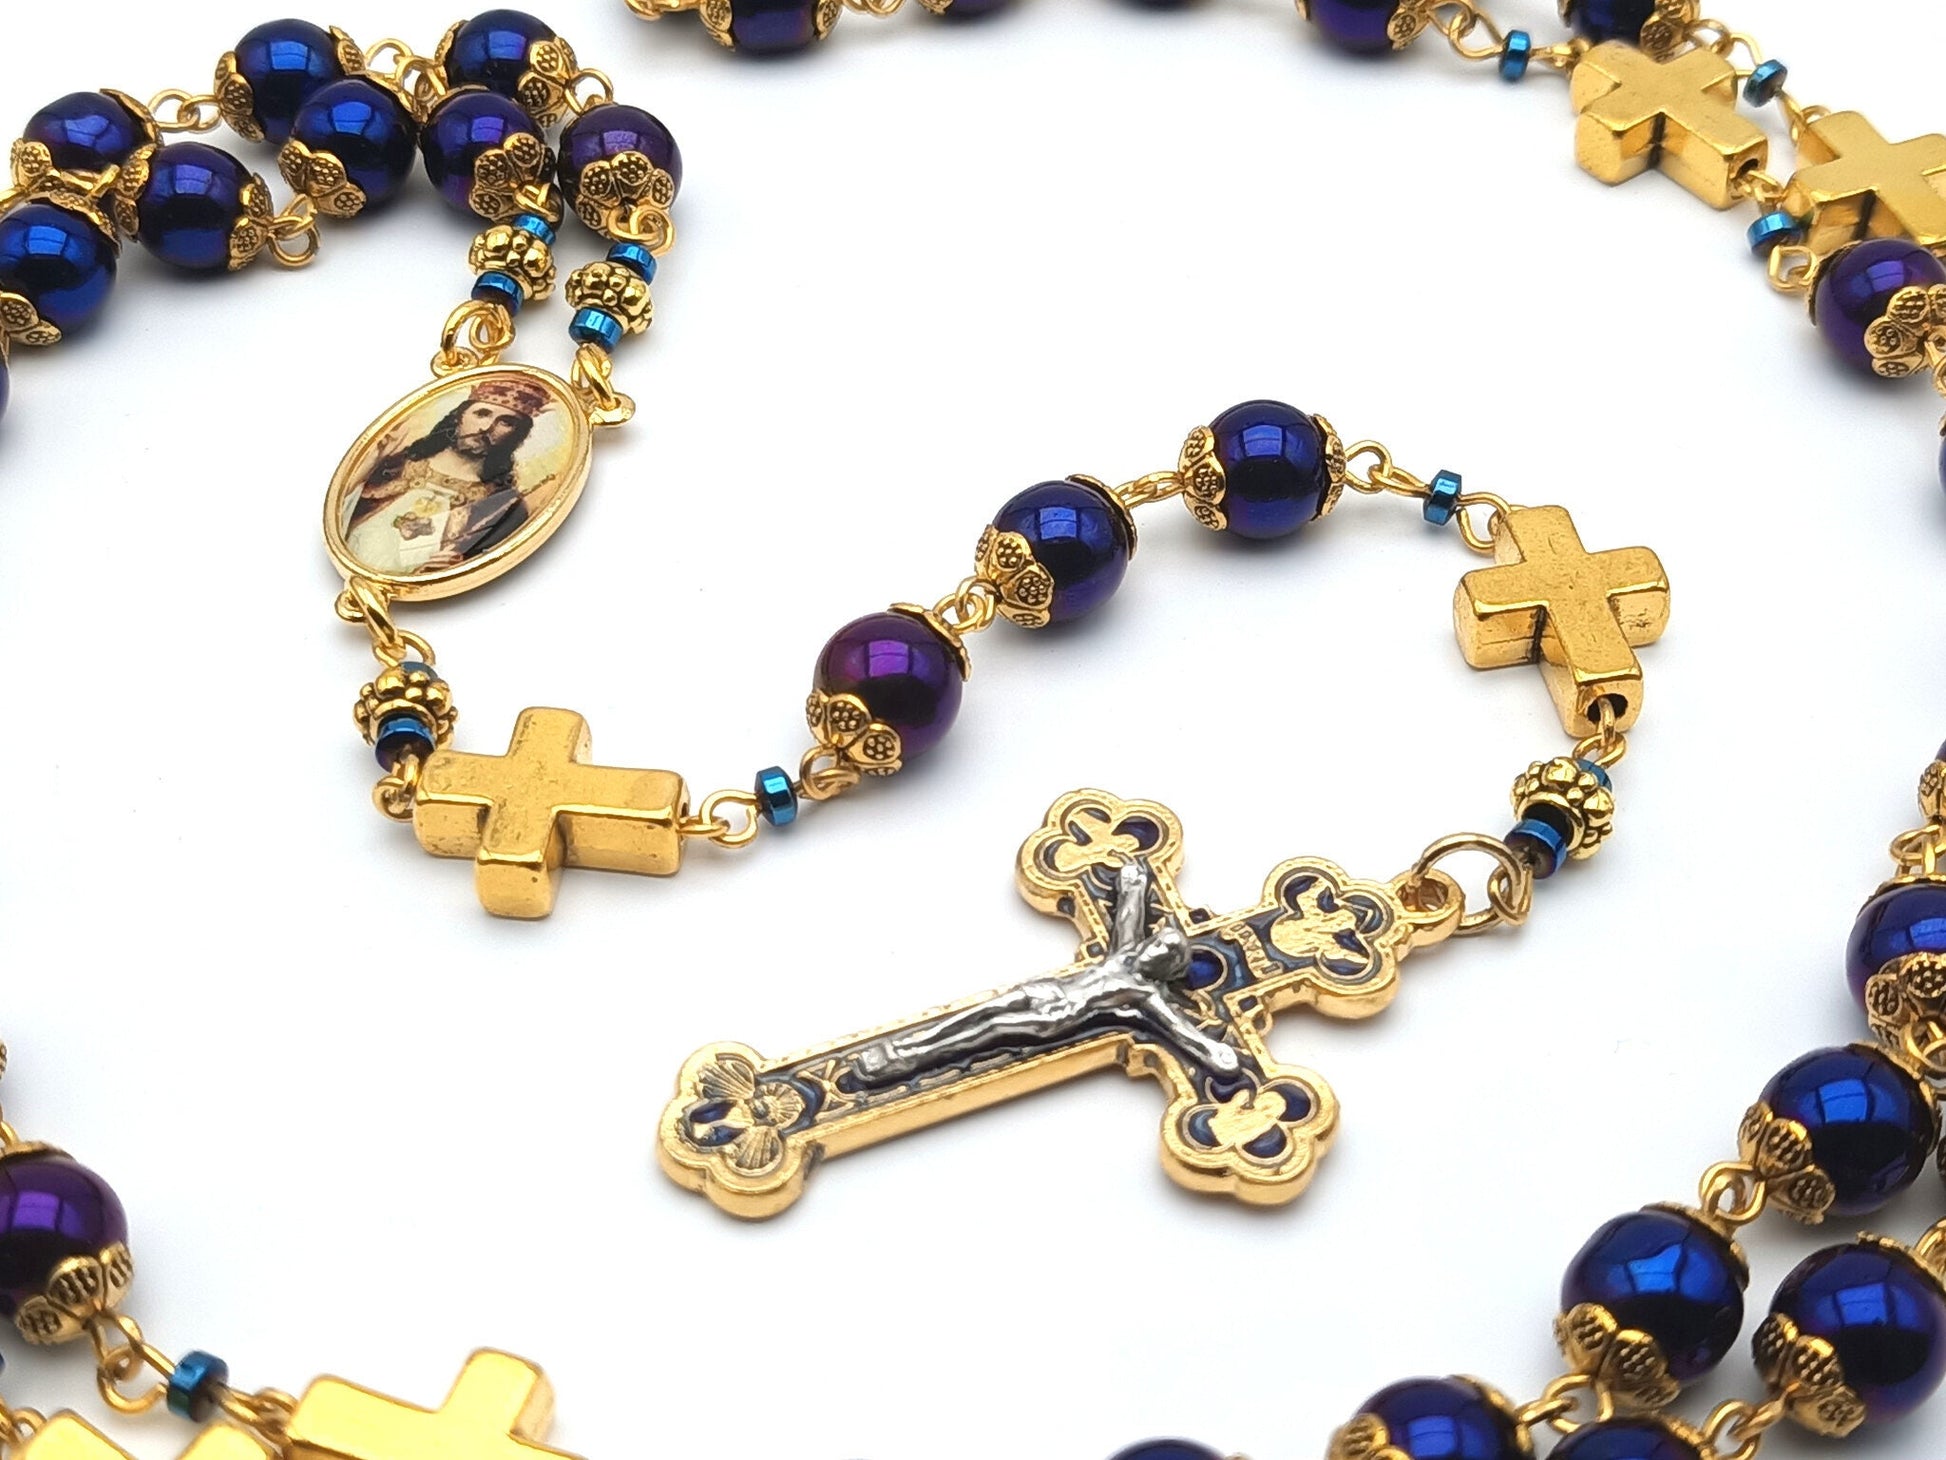 Christ the King unique rosary beads with blue hematite beads, golden cross pater beads, blue and gold crucifix and picture centre medal.